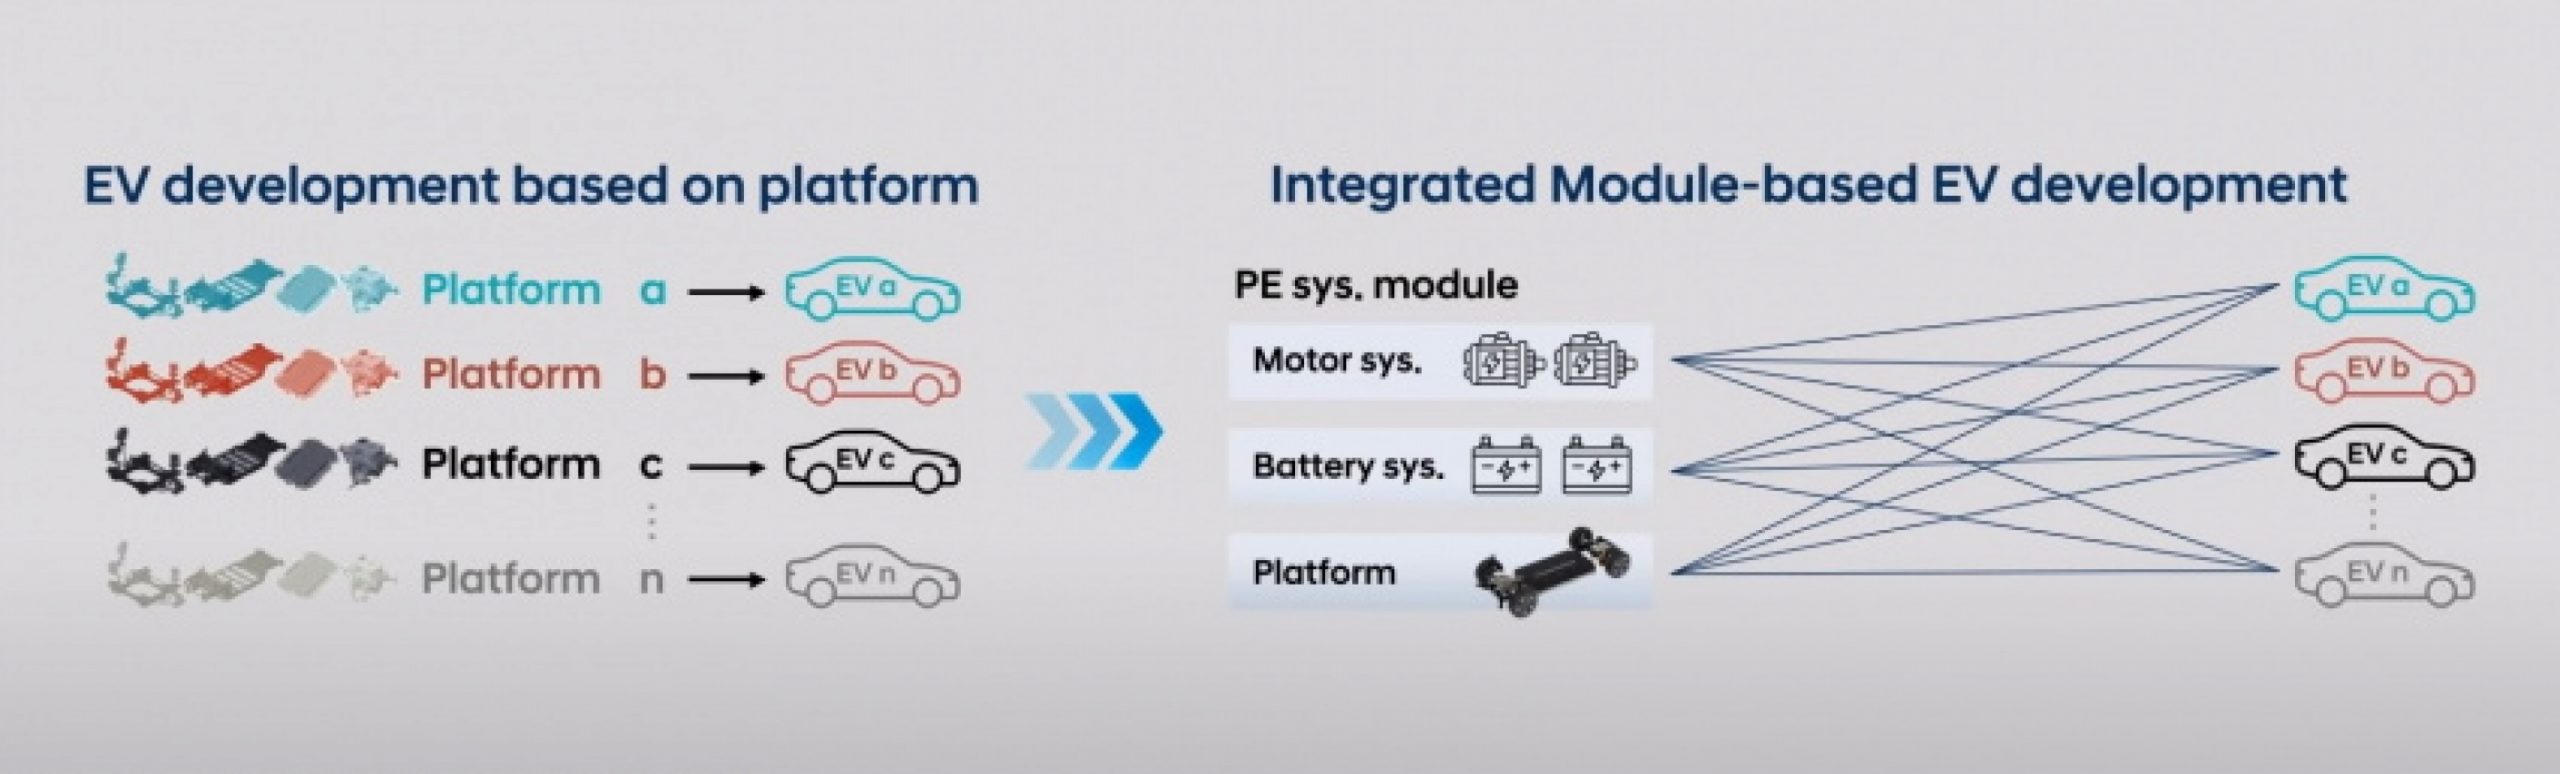 autos, cars, hyundai, batteries, electric vehicles, integrated modular architecture, vnex, zero emissions, hyundai to use new integrated modular architecture for all future bev models